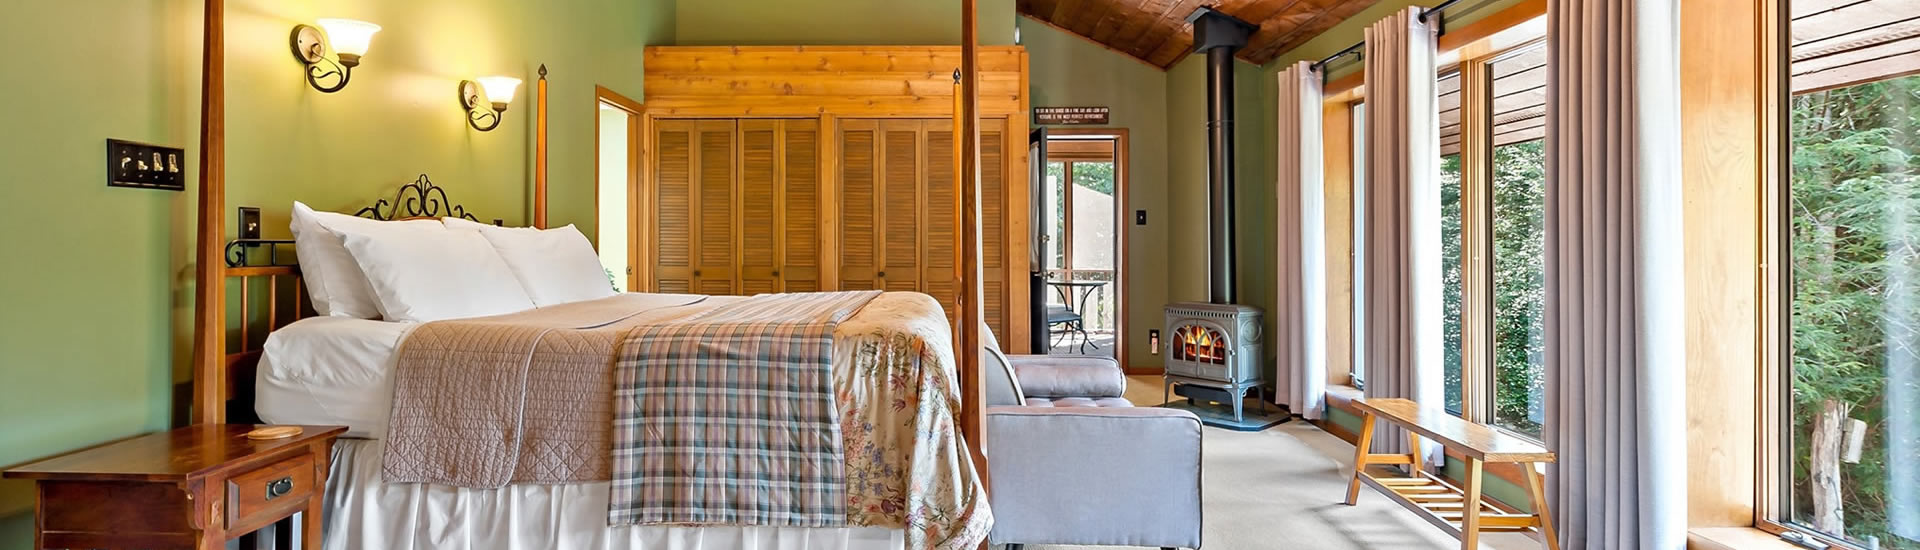 Bedroom with 4-post bed, large wooden armoire and fan on vaulted ceiling